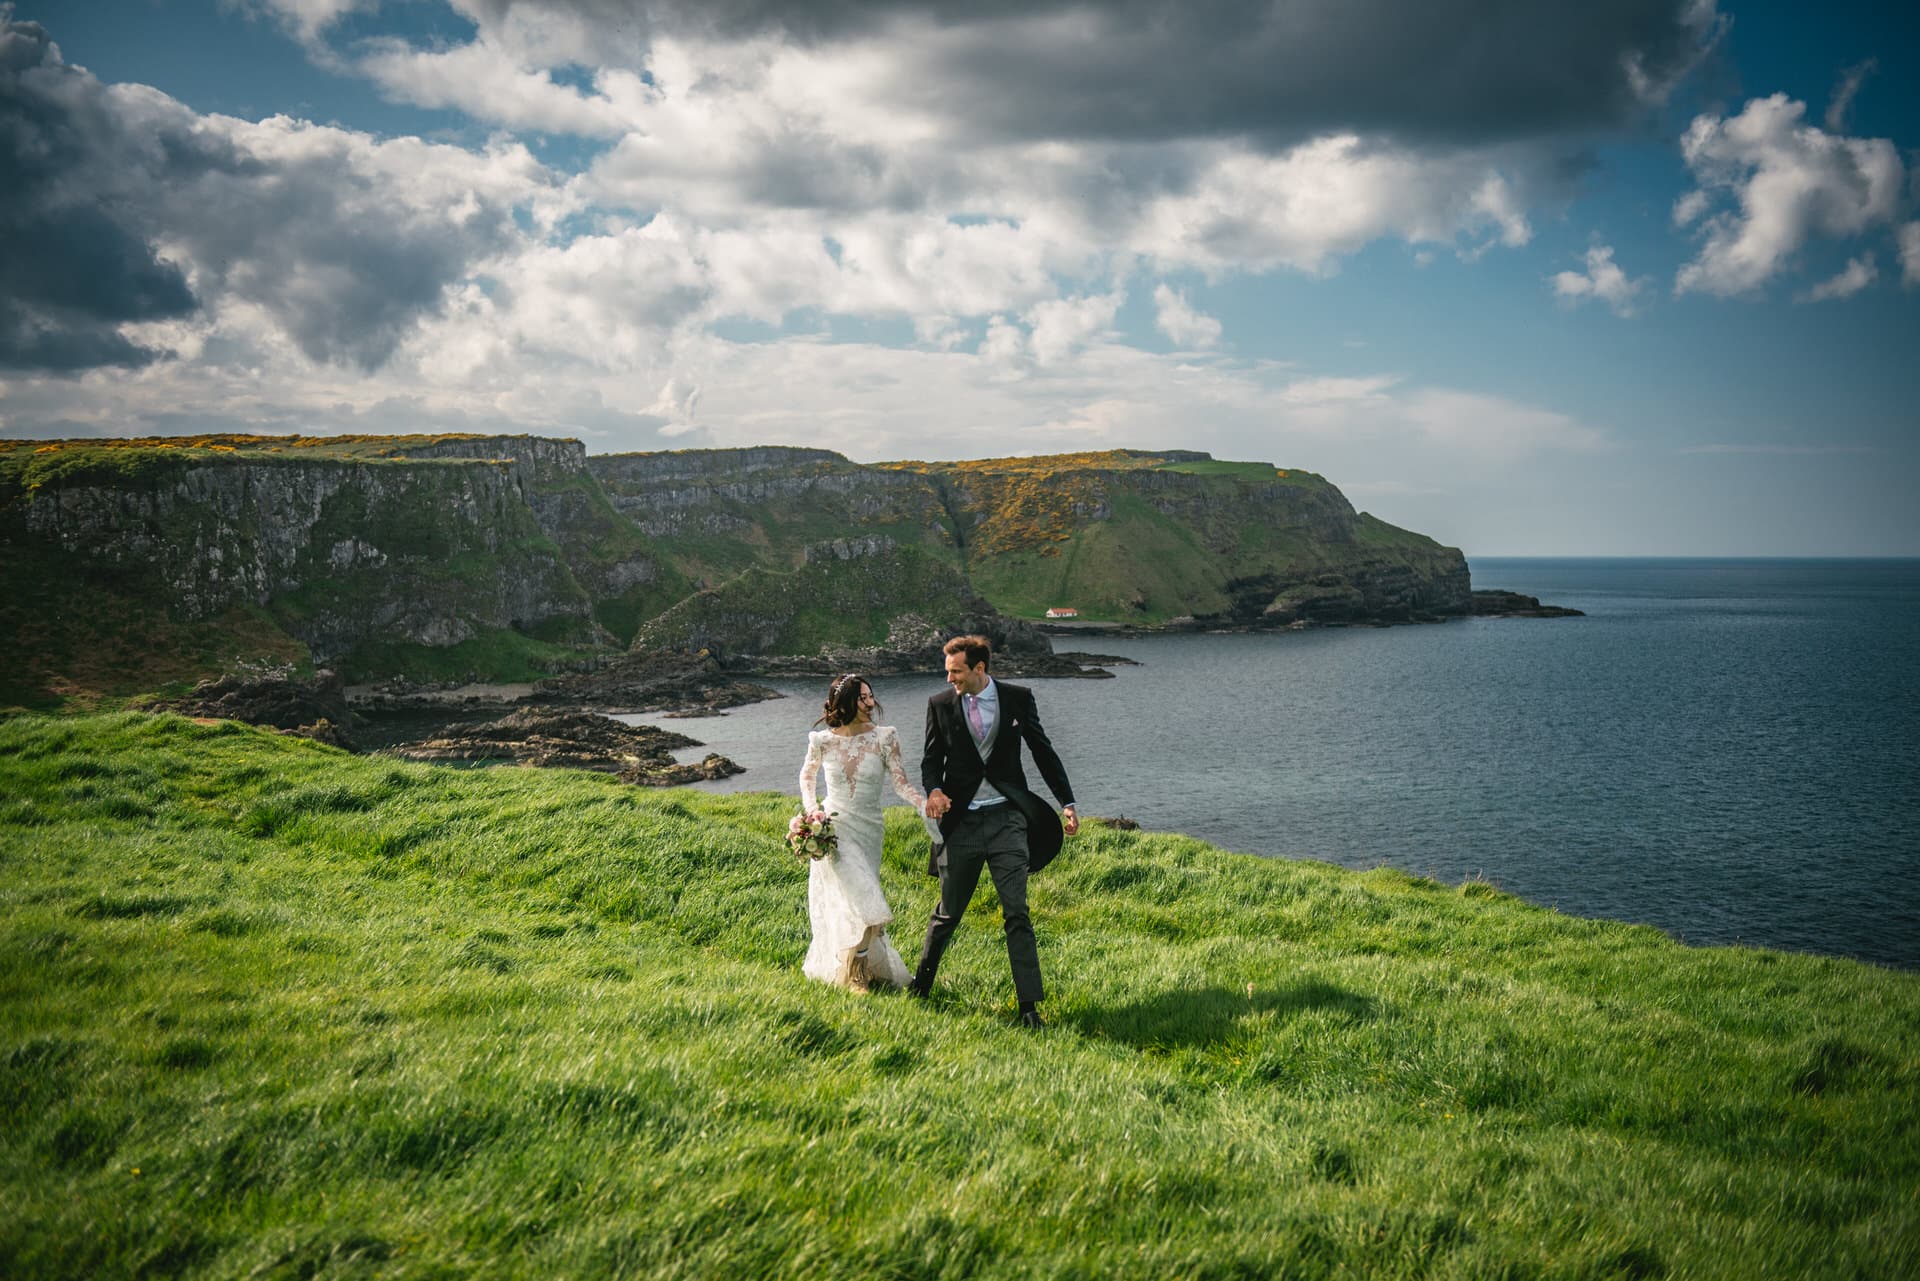 Candid shot of the couple laughing together during their Northern Ireland elopement.